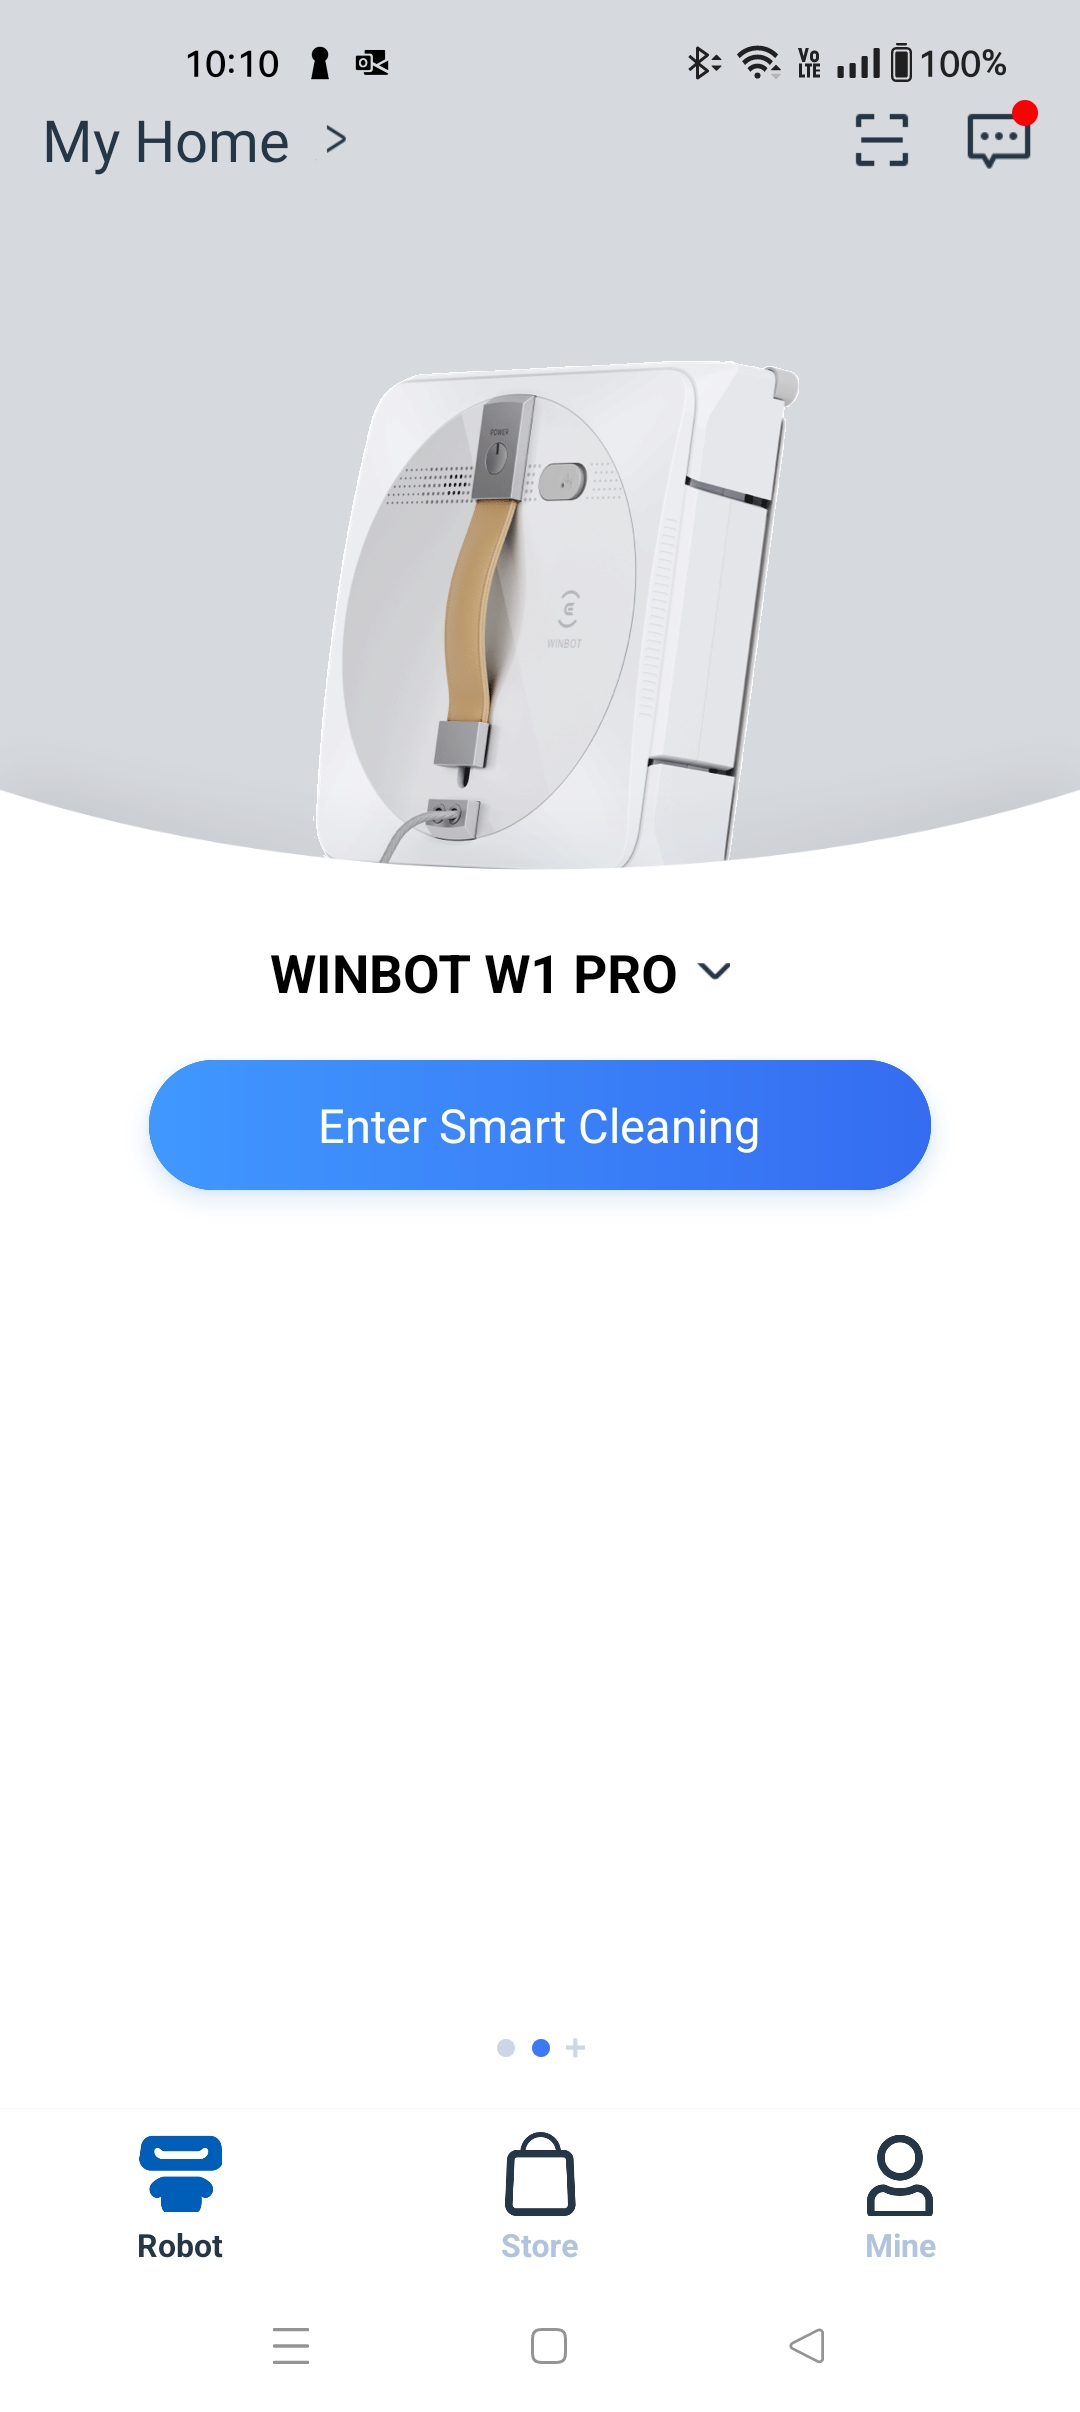 The Winbot W1 Pro is a great cleaning bot, but it isn't for everyone